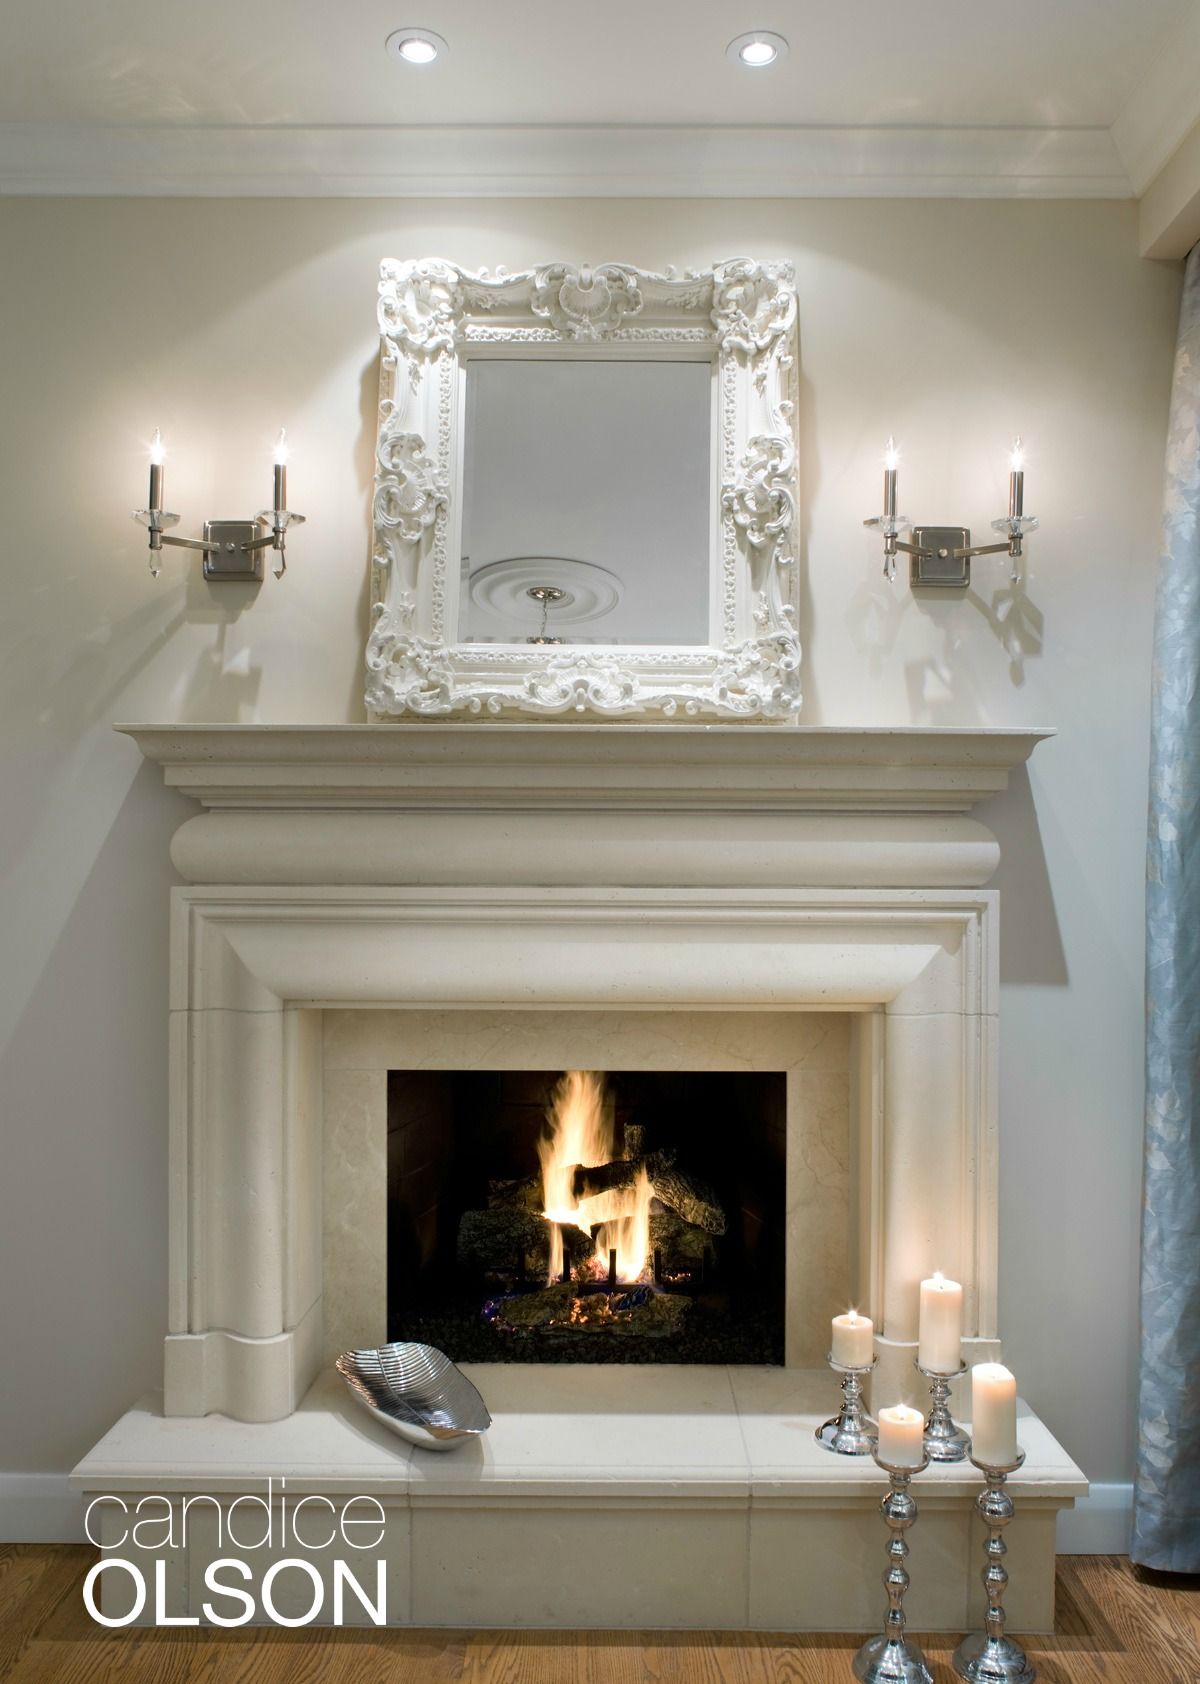 Fireplace Hearth Stone Lovely A Beautiful Cast Stone Surround and Hearth Look Like Hand